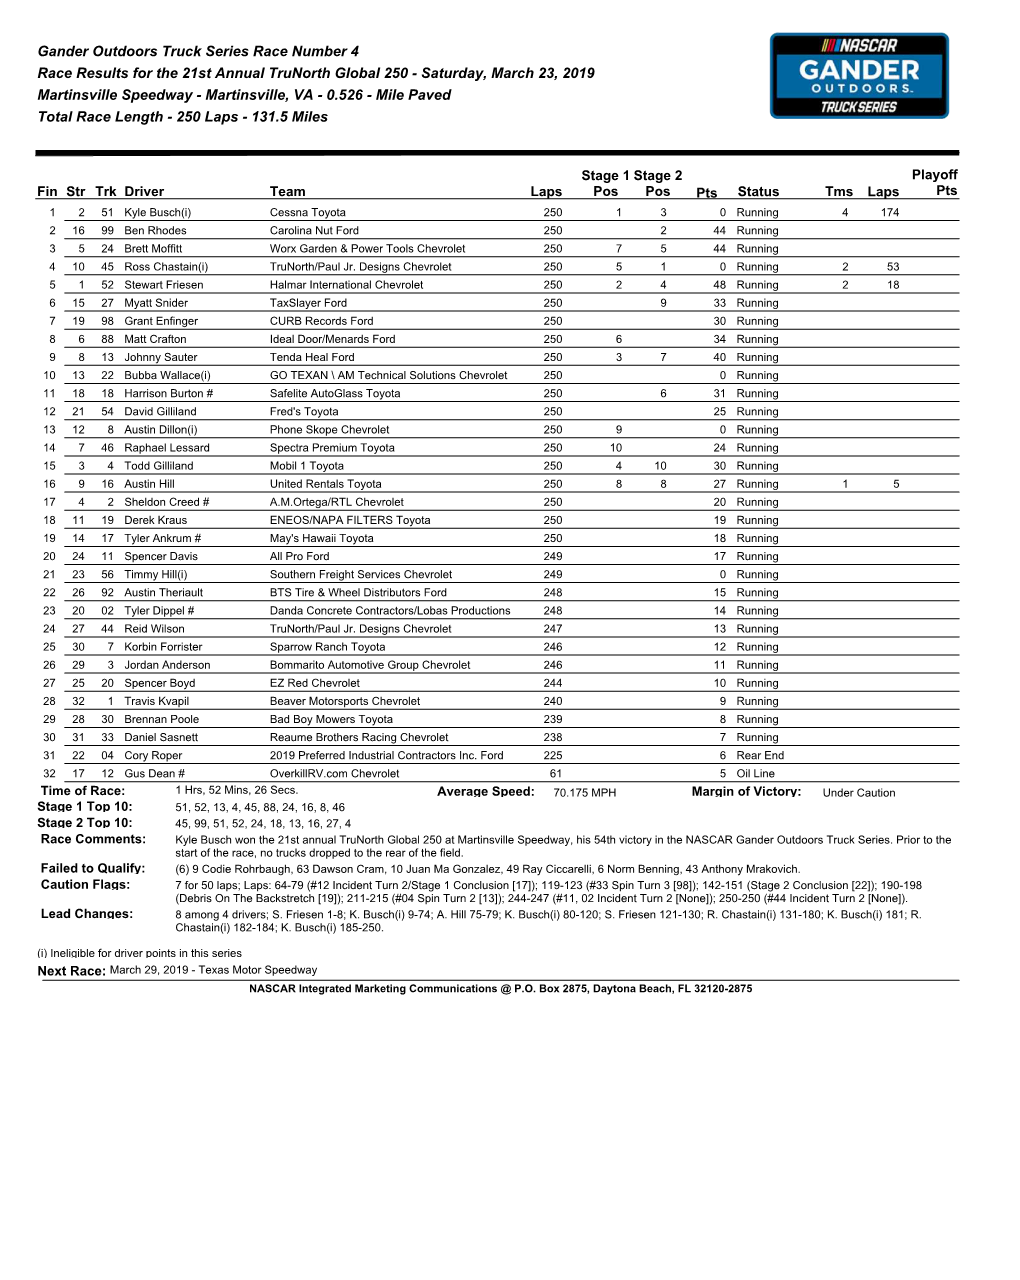 Gander Outdoors Truck Series Race Number 4 Race Results for the 21St